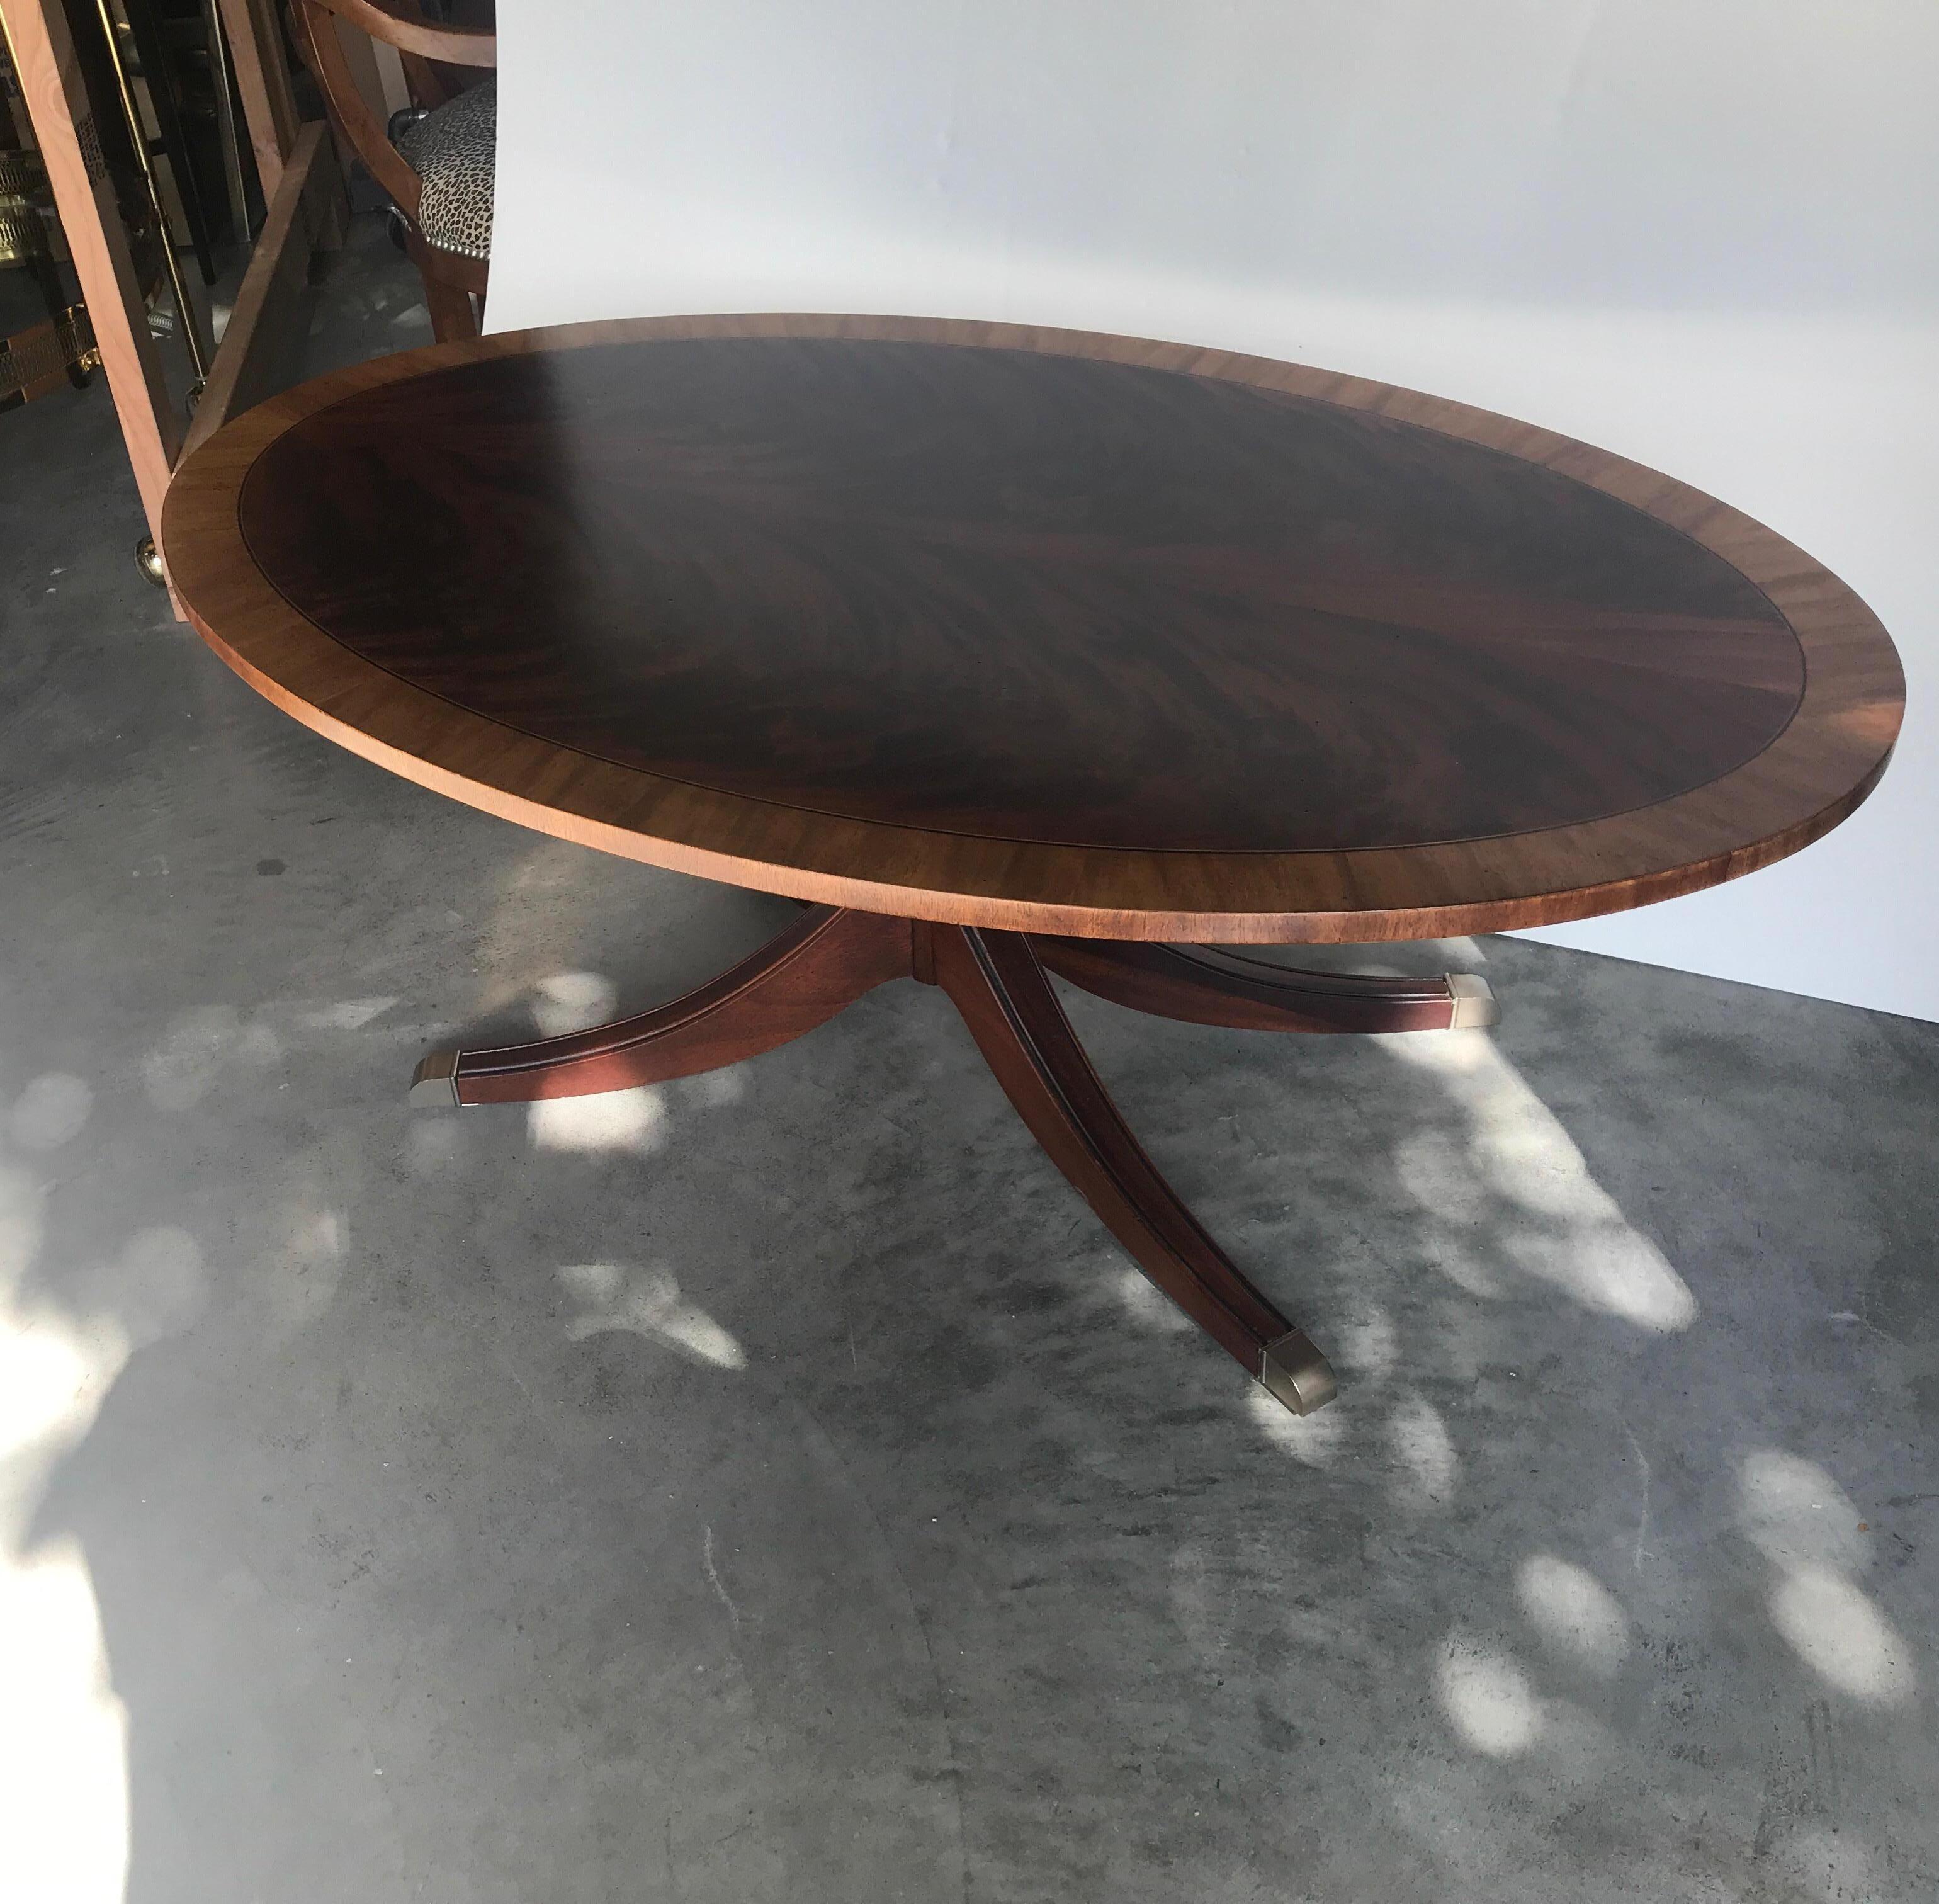 Graceful oval flame mahogany cocktail table with pearl wood border. The generous size top with central column and classic Duncan Phyfe four leg base and brass capped feet.